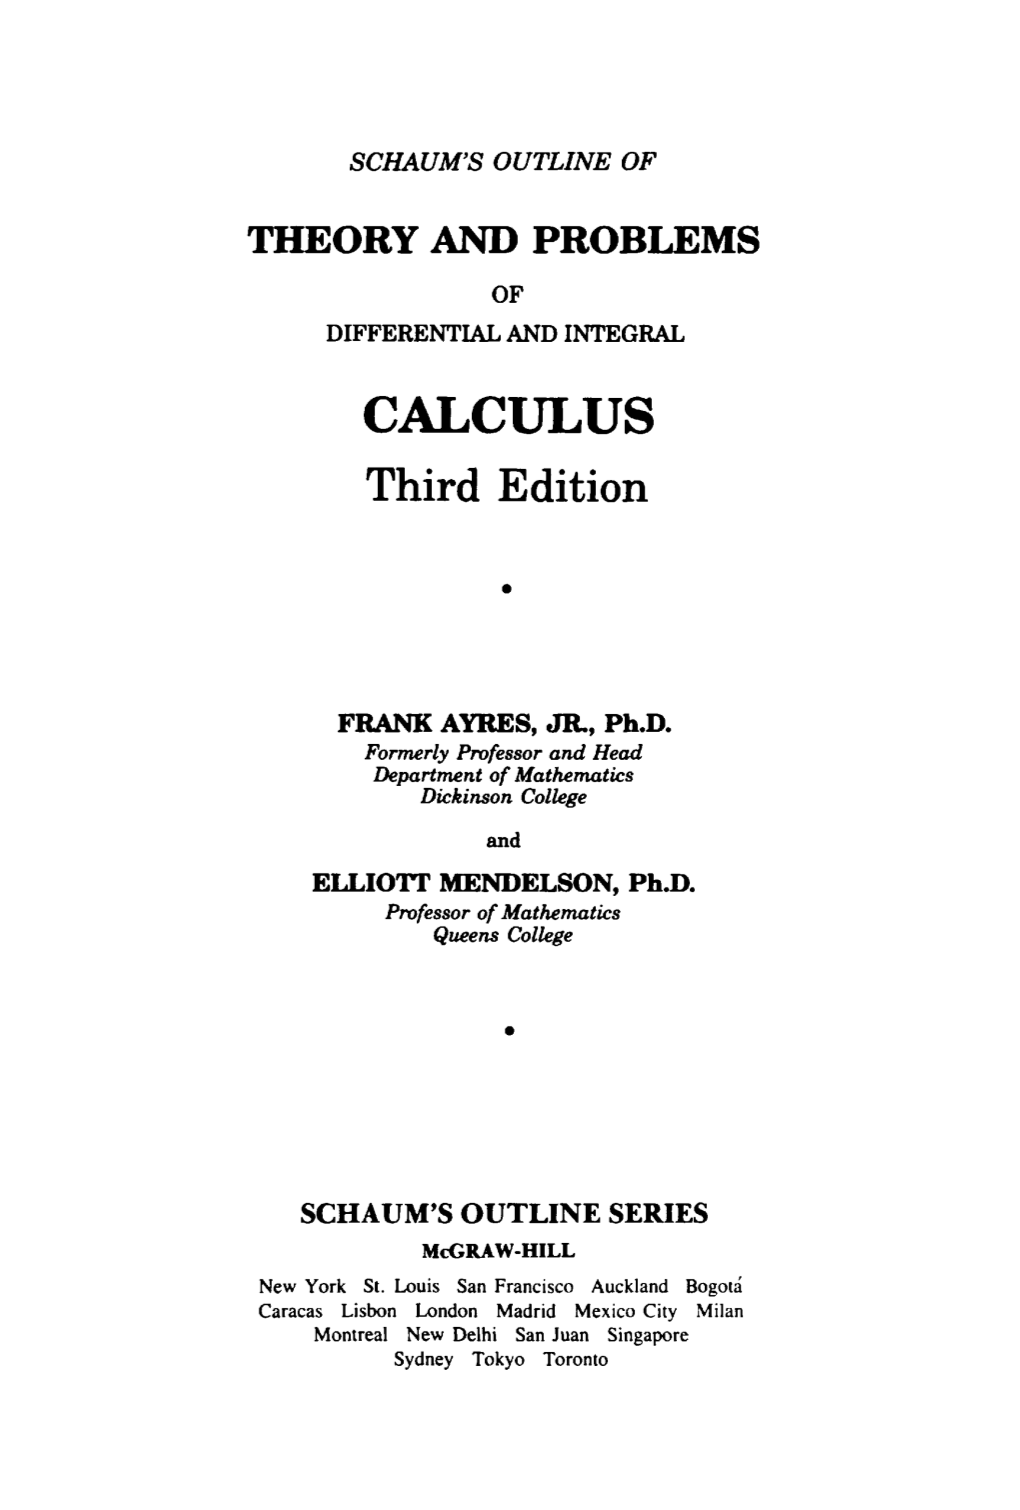 Schaum's Outline of Theory and Problems of Differential and Integral